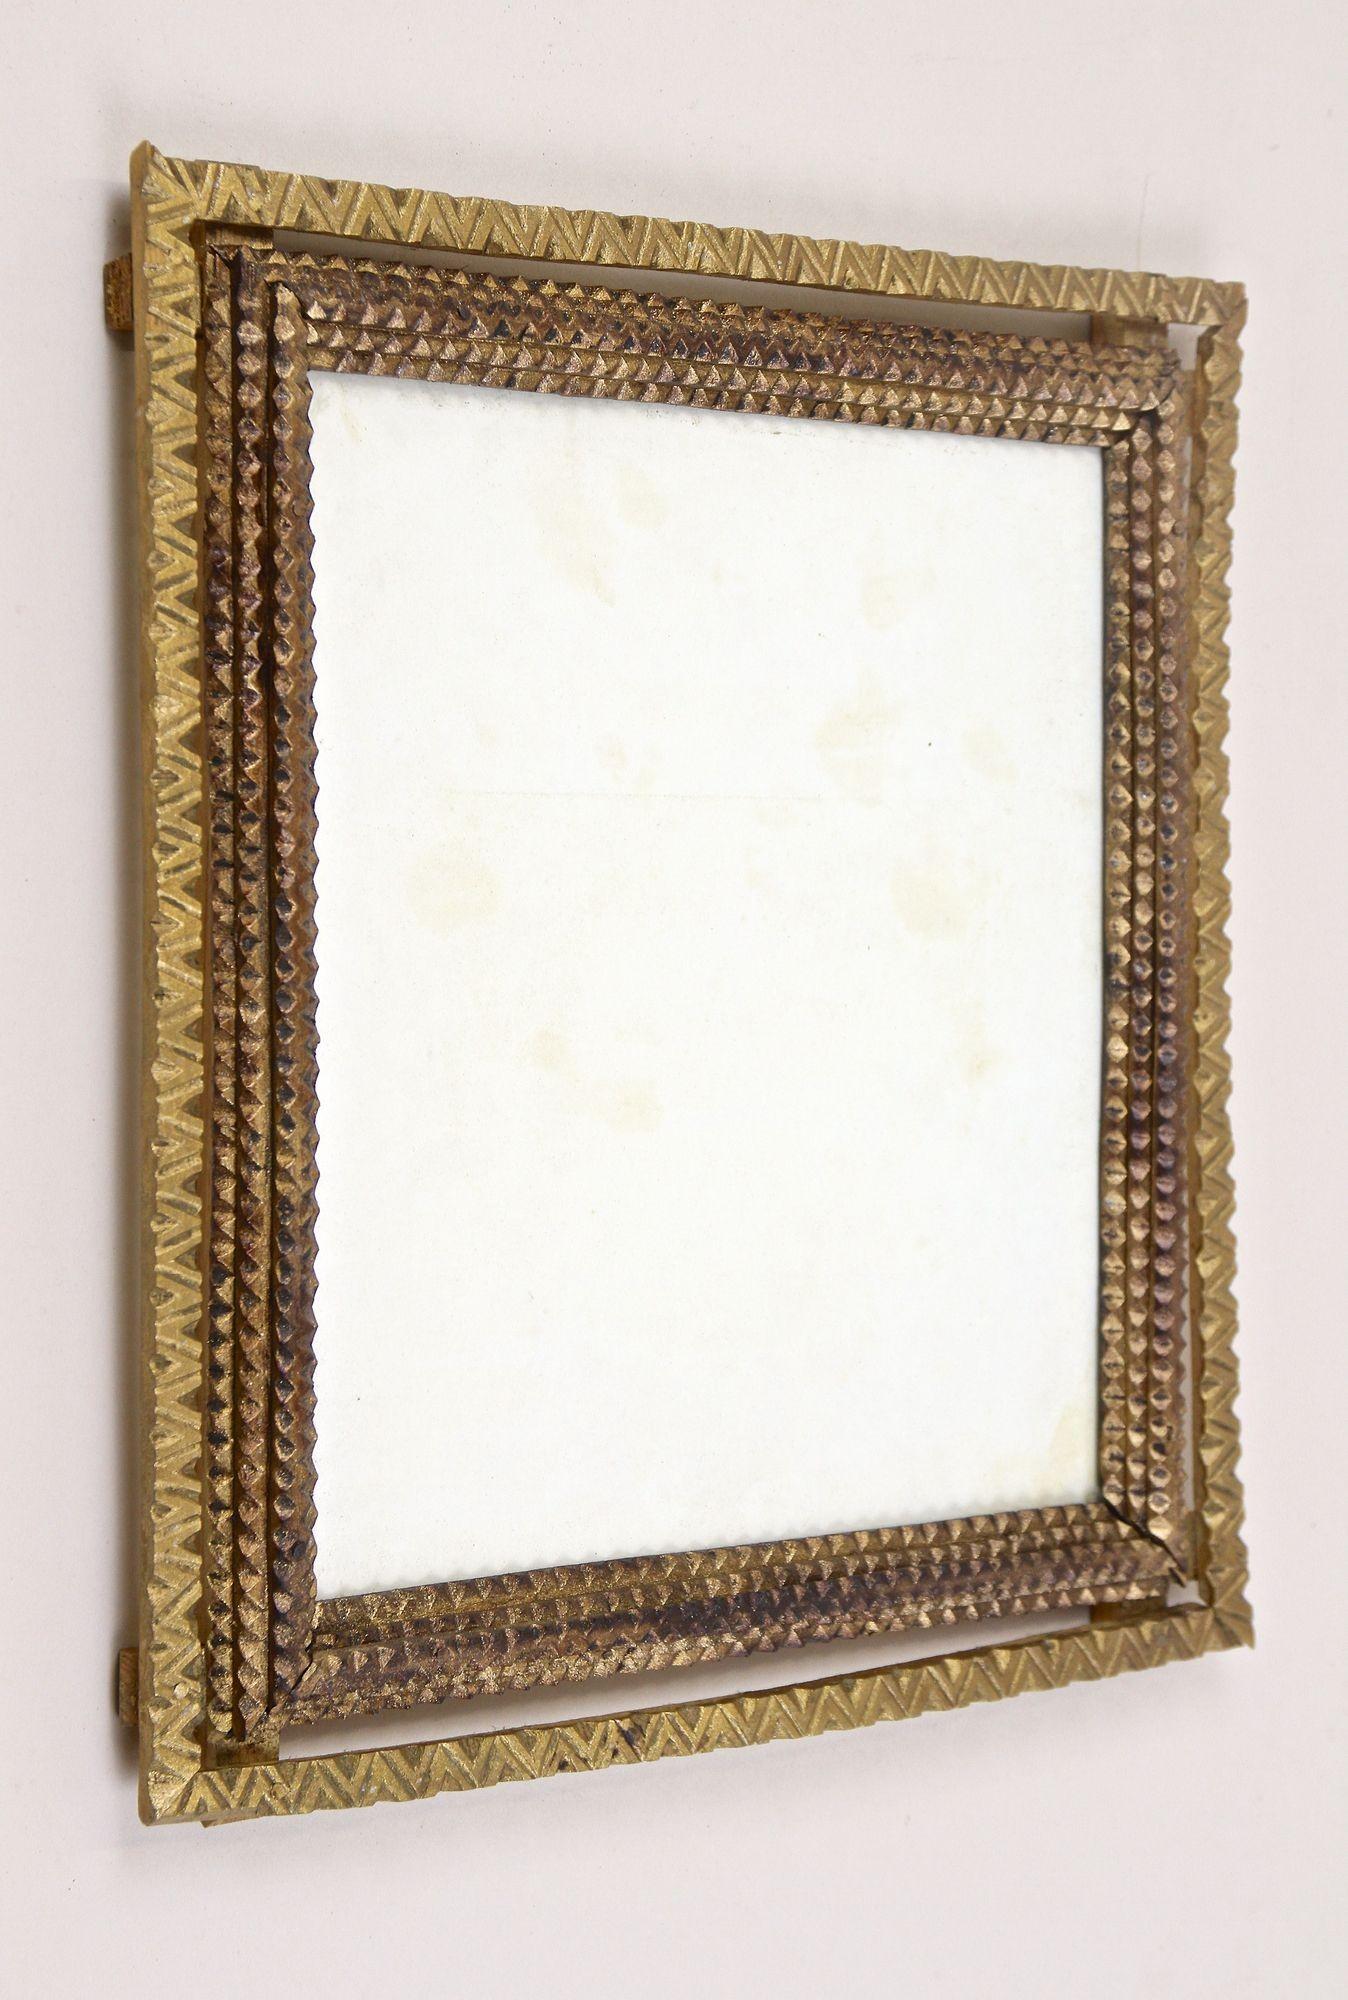 Unusual gilt Tramp Art photo frame from the period in Austria around 1870. Elaborately hand carved out of bass this antique rustic photo frame impresses with a double frame: the beautiful inner section shows the so-called 